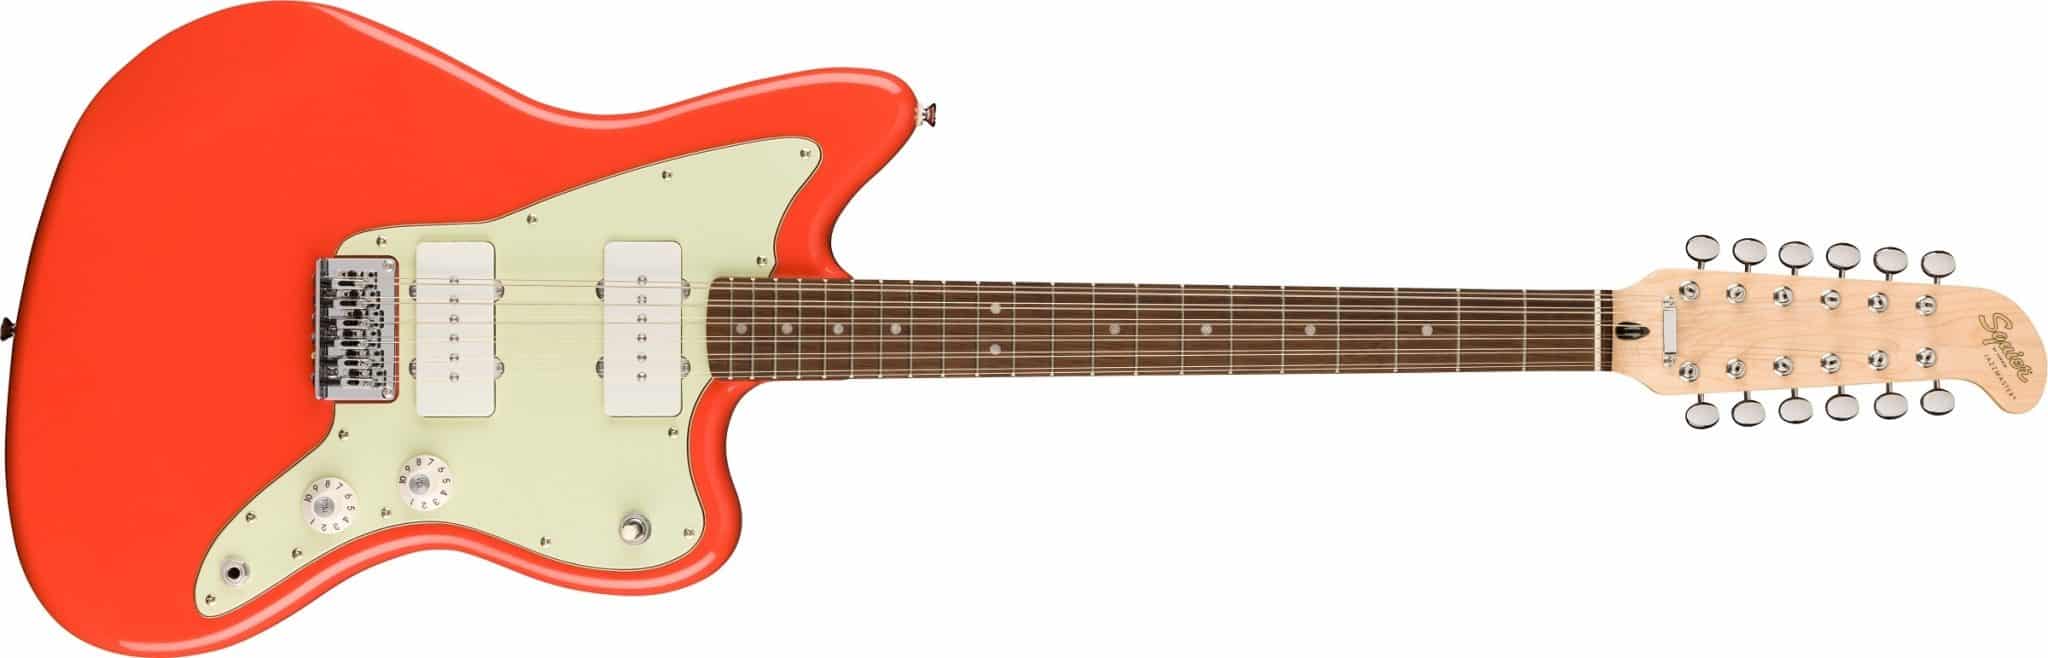 LIMITED EDITION PARANORMAL JAZZMASTER XII